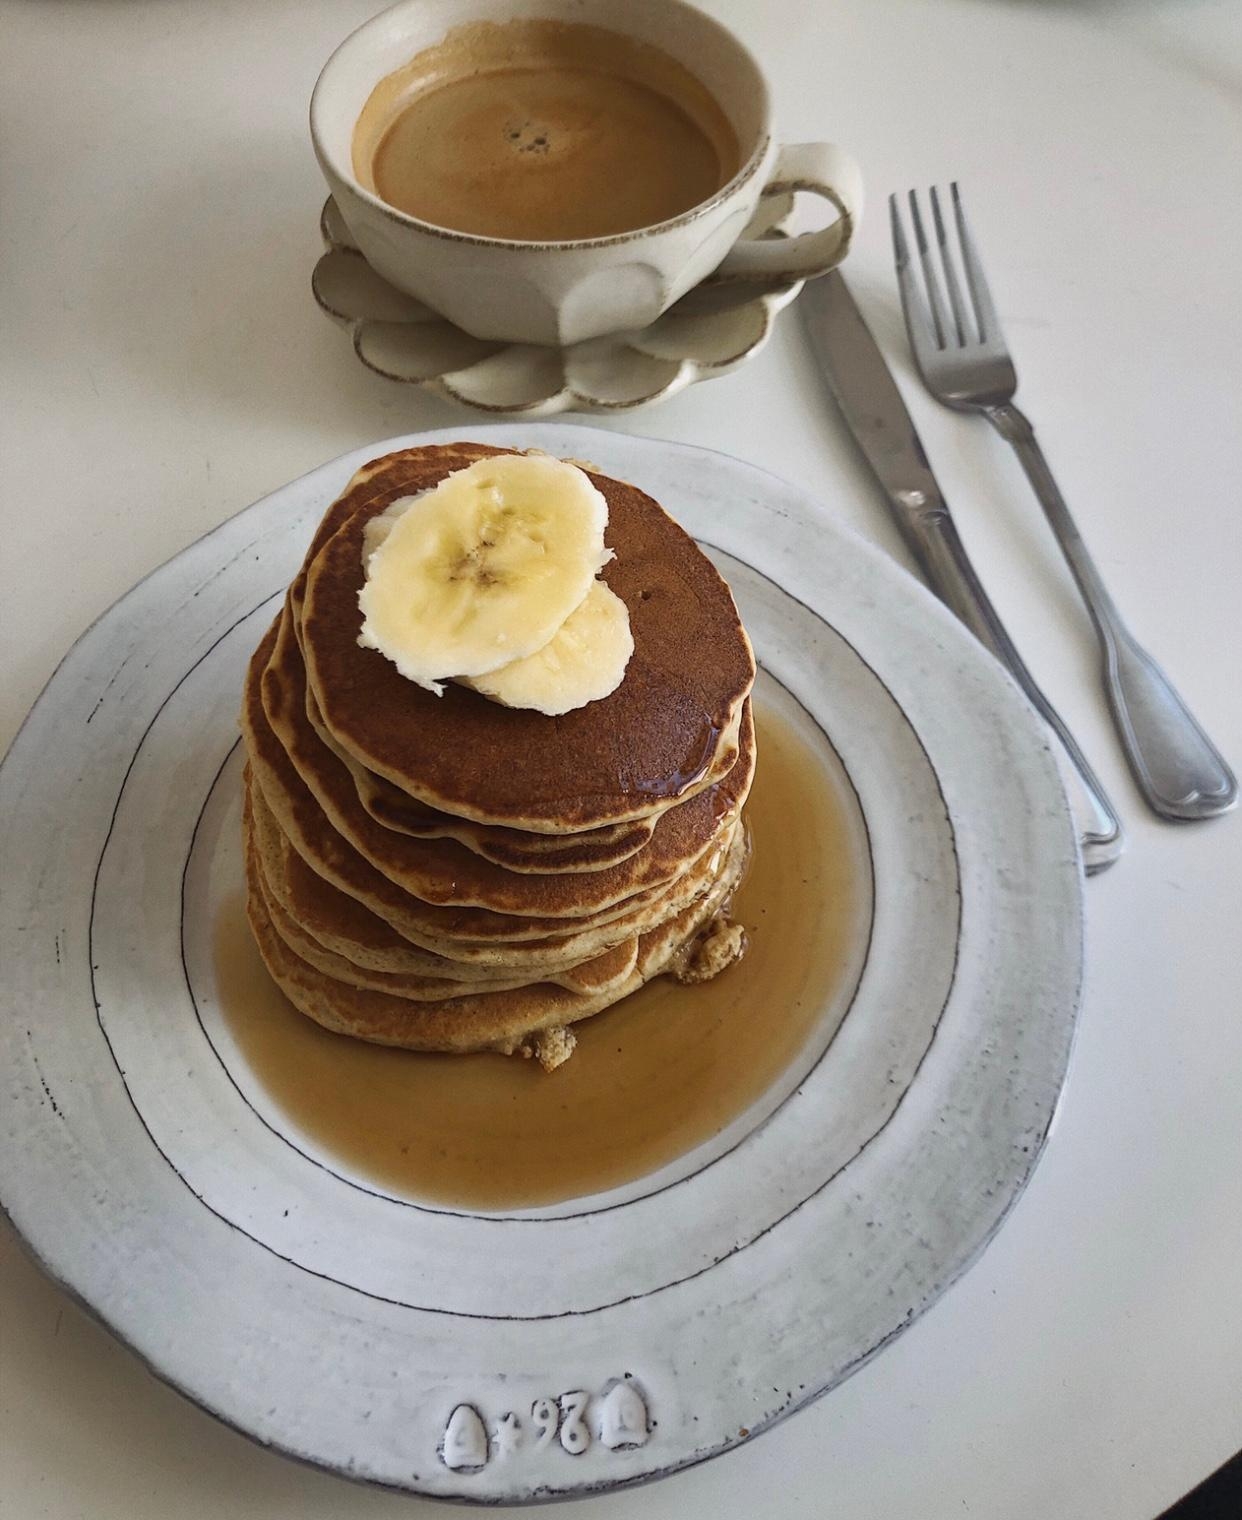 Gumo 🥞
#gumo #pancakes #coffee #tableware #pottery #homedecor #interior #couchstyle #minimalistic #kitchen #foodstyling